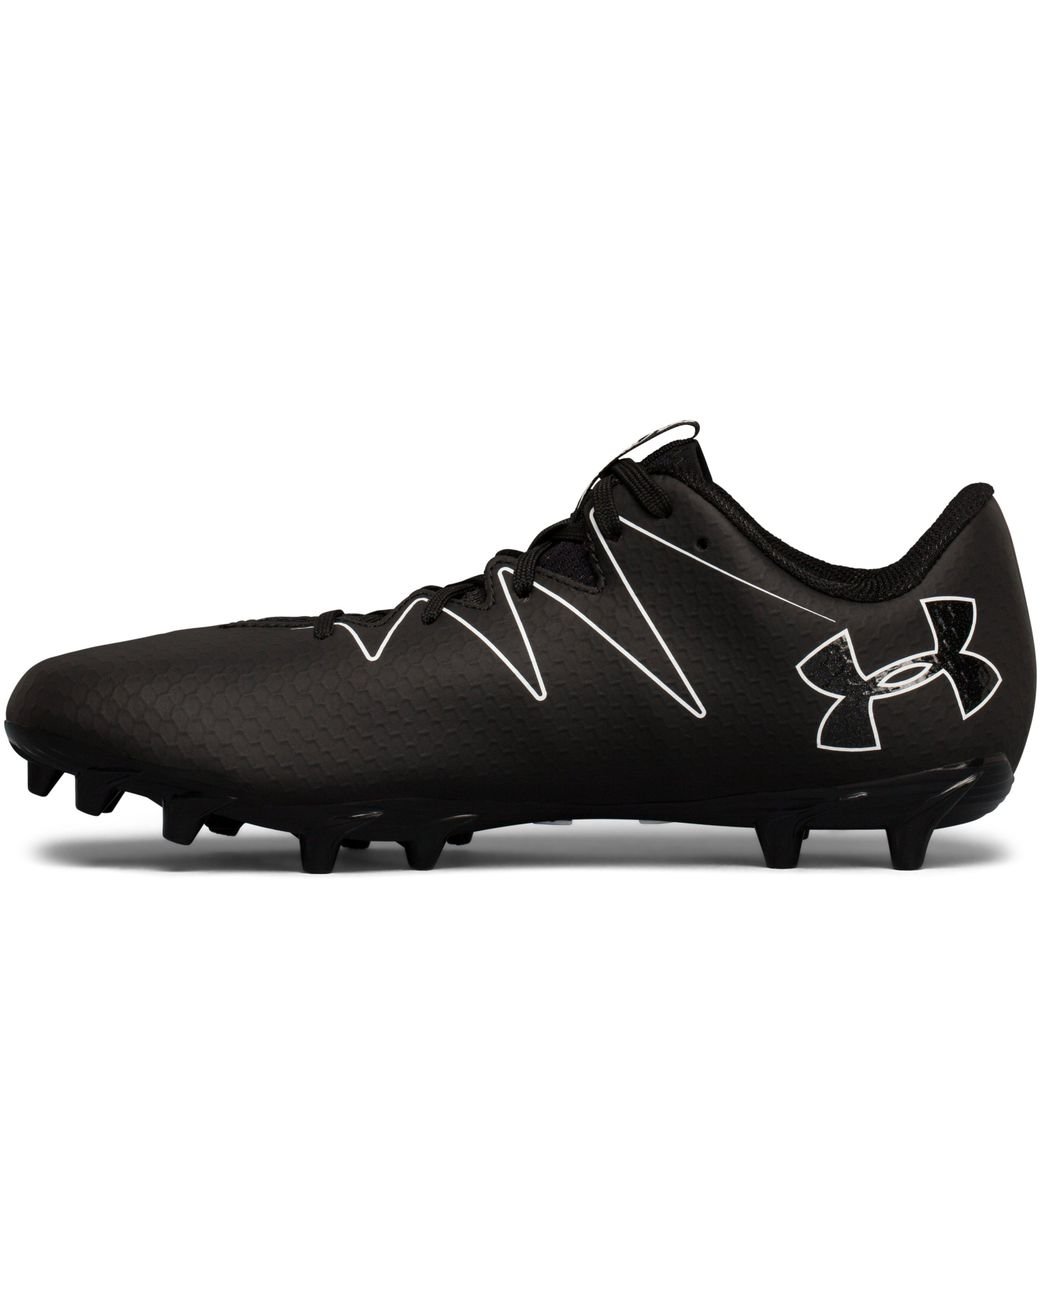 Under Armour Football Highlight Nitro Low Football Cleat Men's 9 Red 1269721 